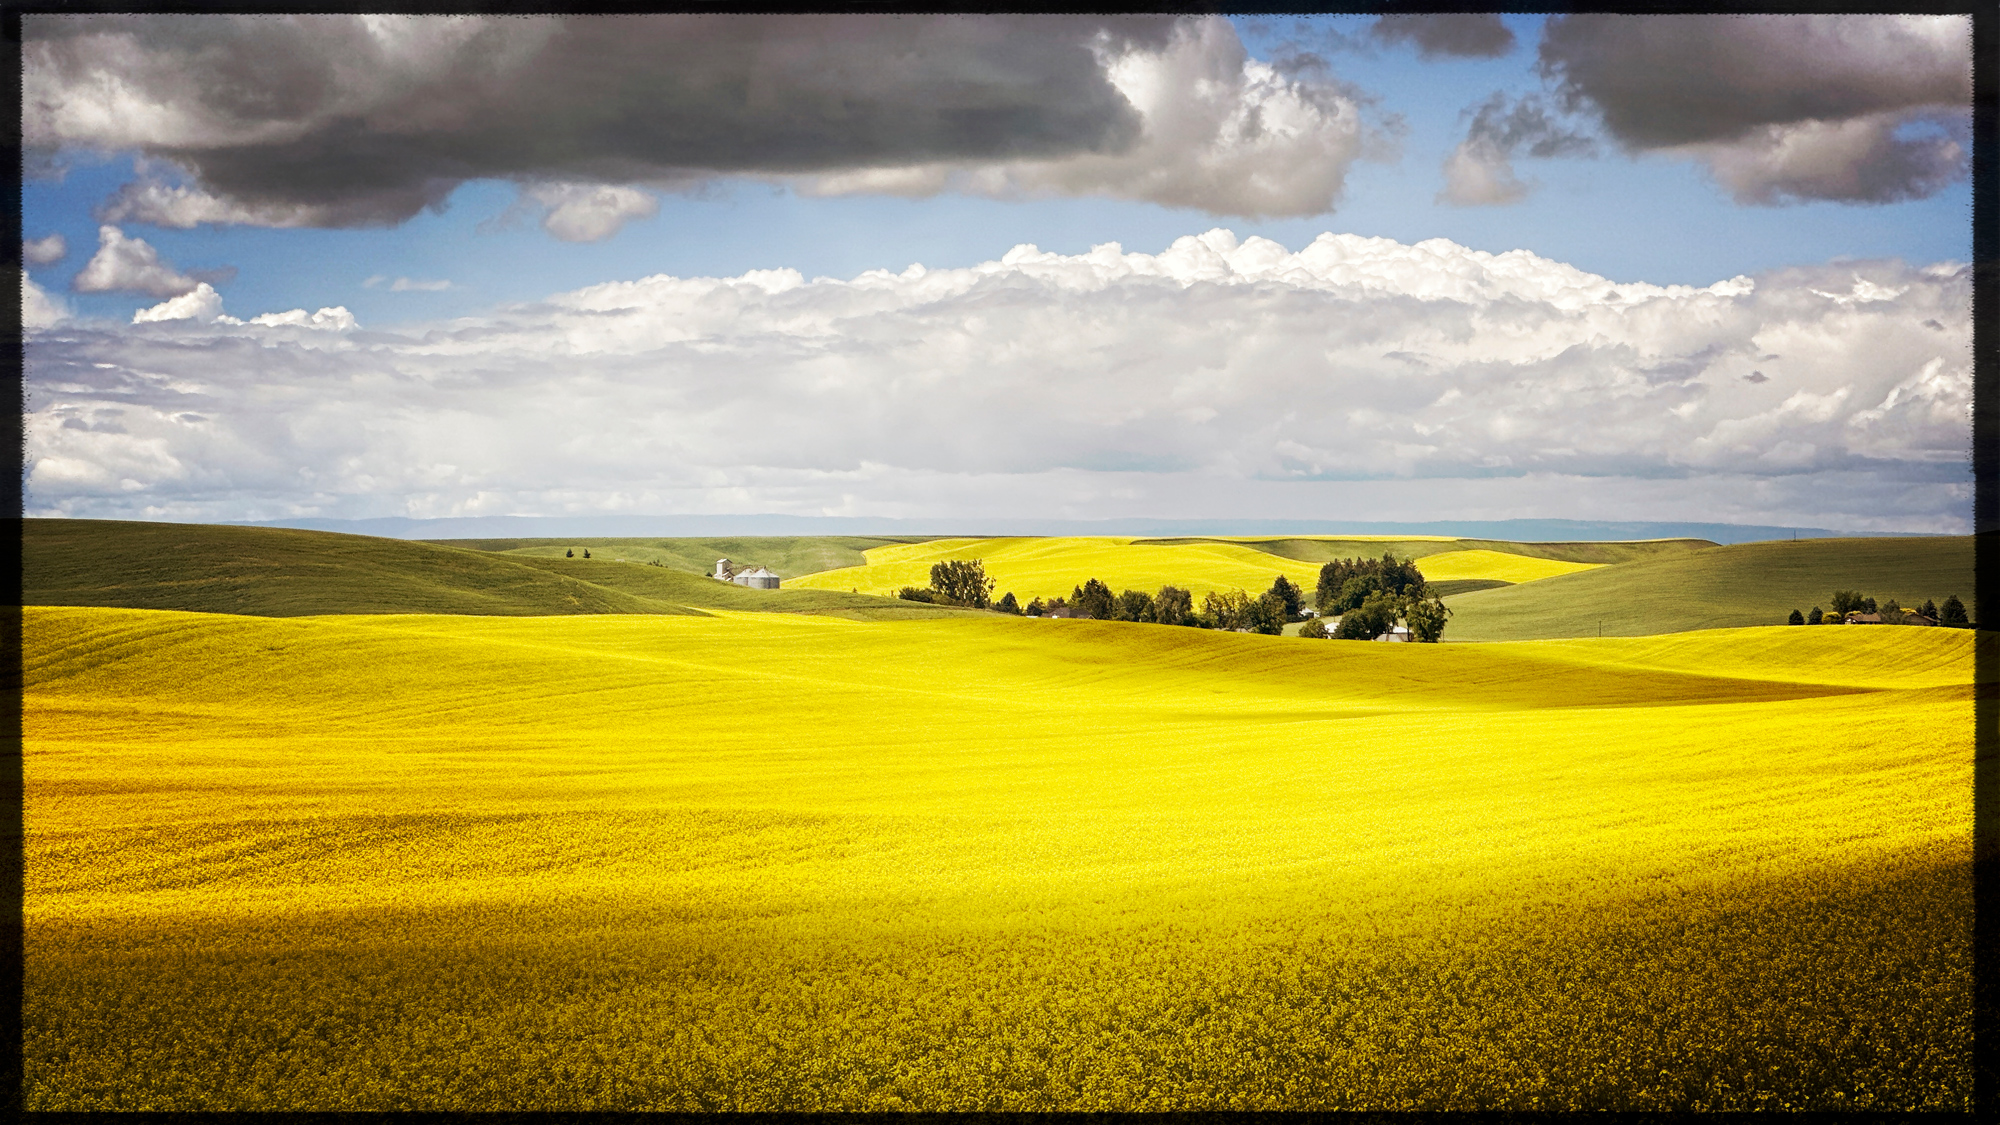 Canola or rape seed was abundant this year. Just massive fields of yellow. So beautiful.